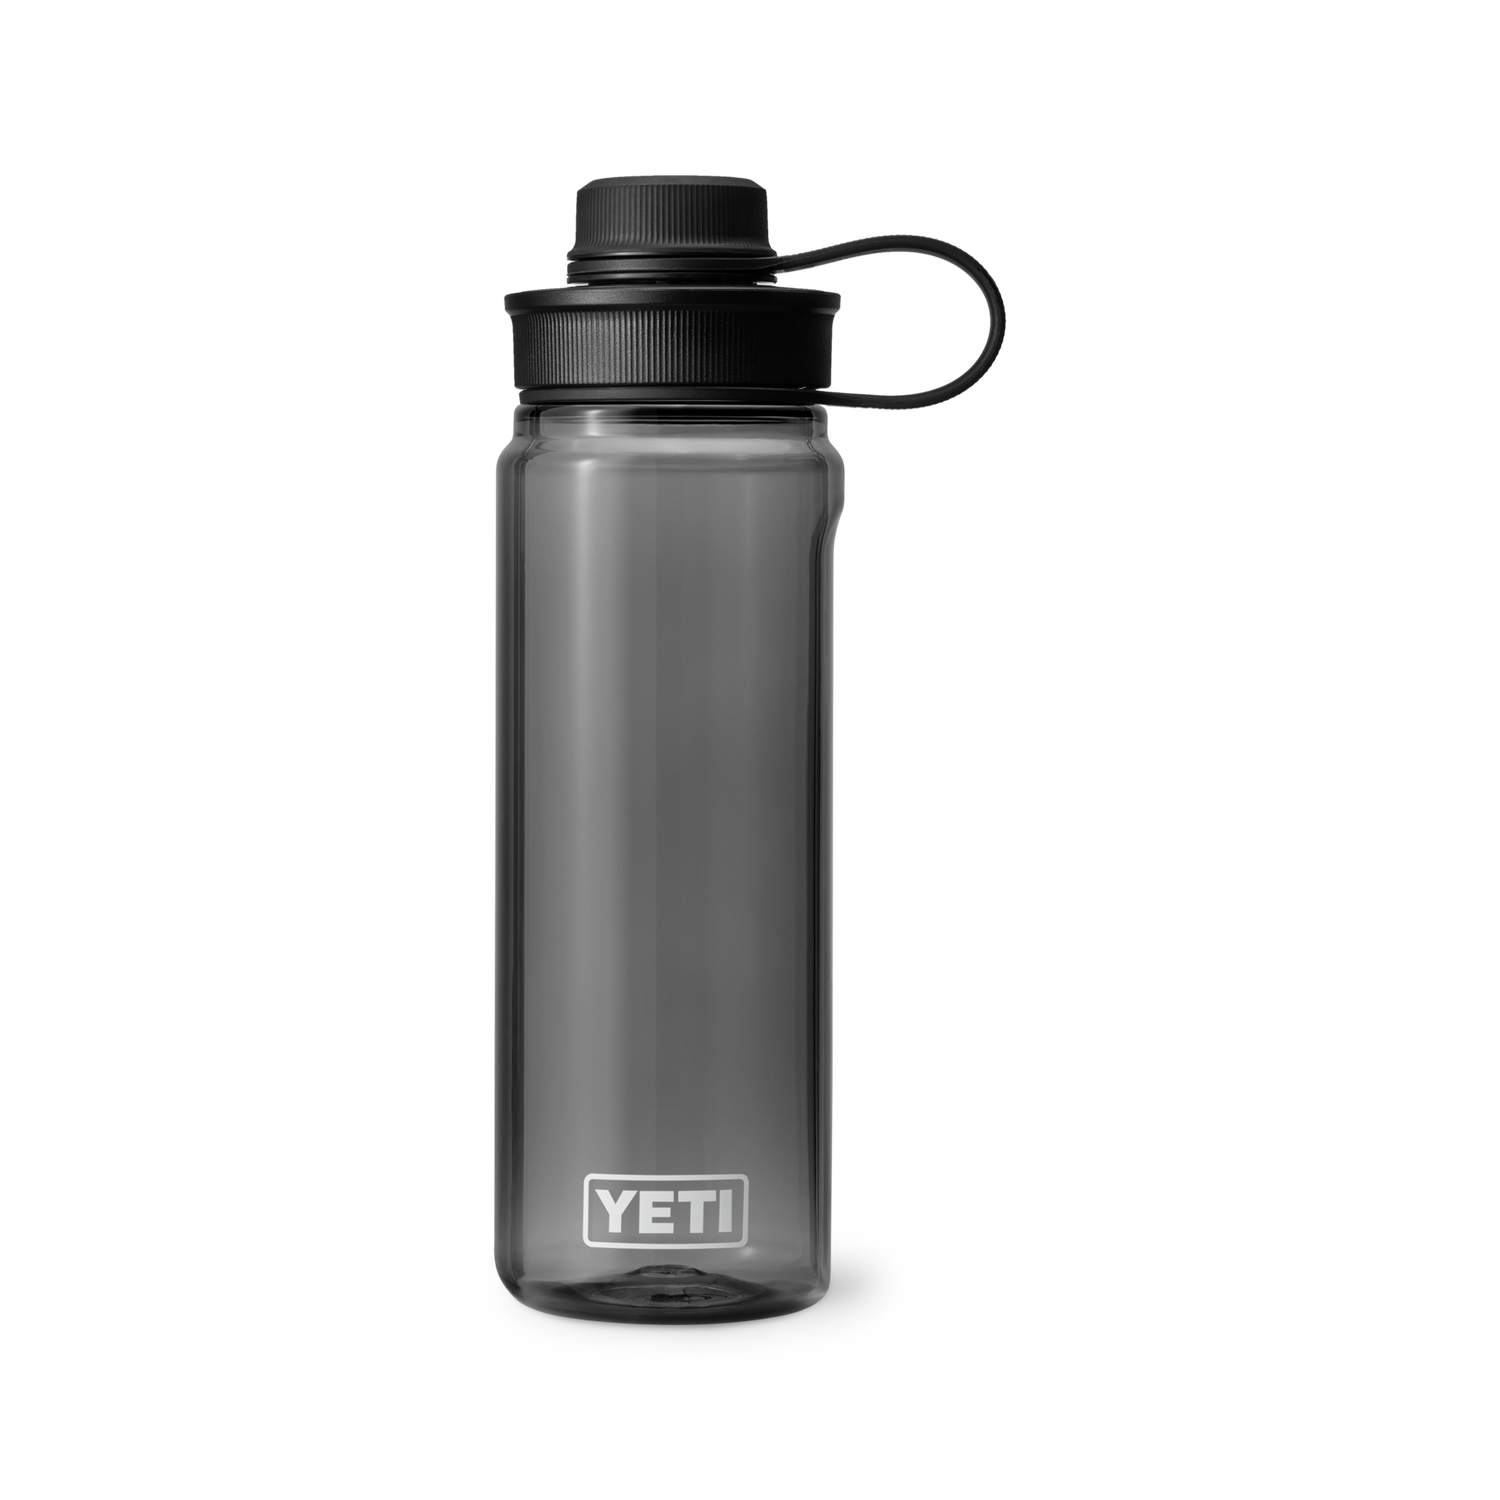 YETI 25oz Mug with Handle & Straw Lid; LE Colors: New, Pick your